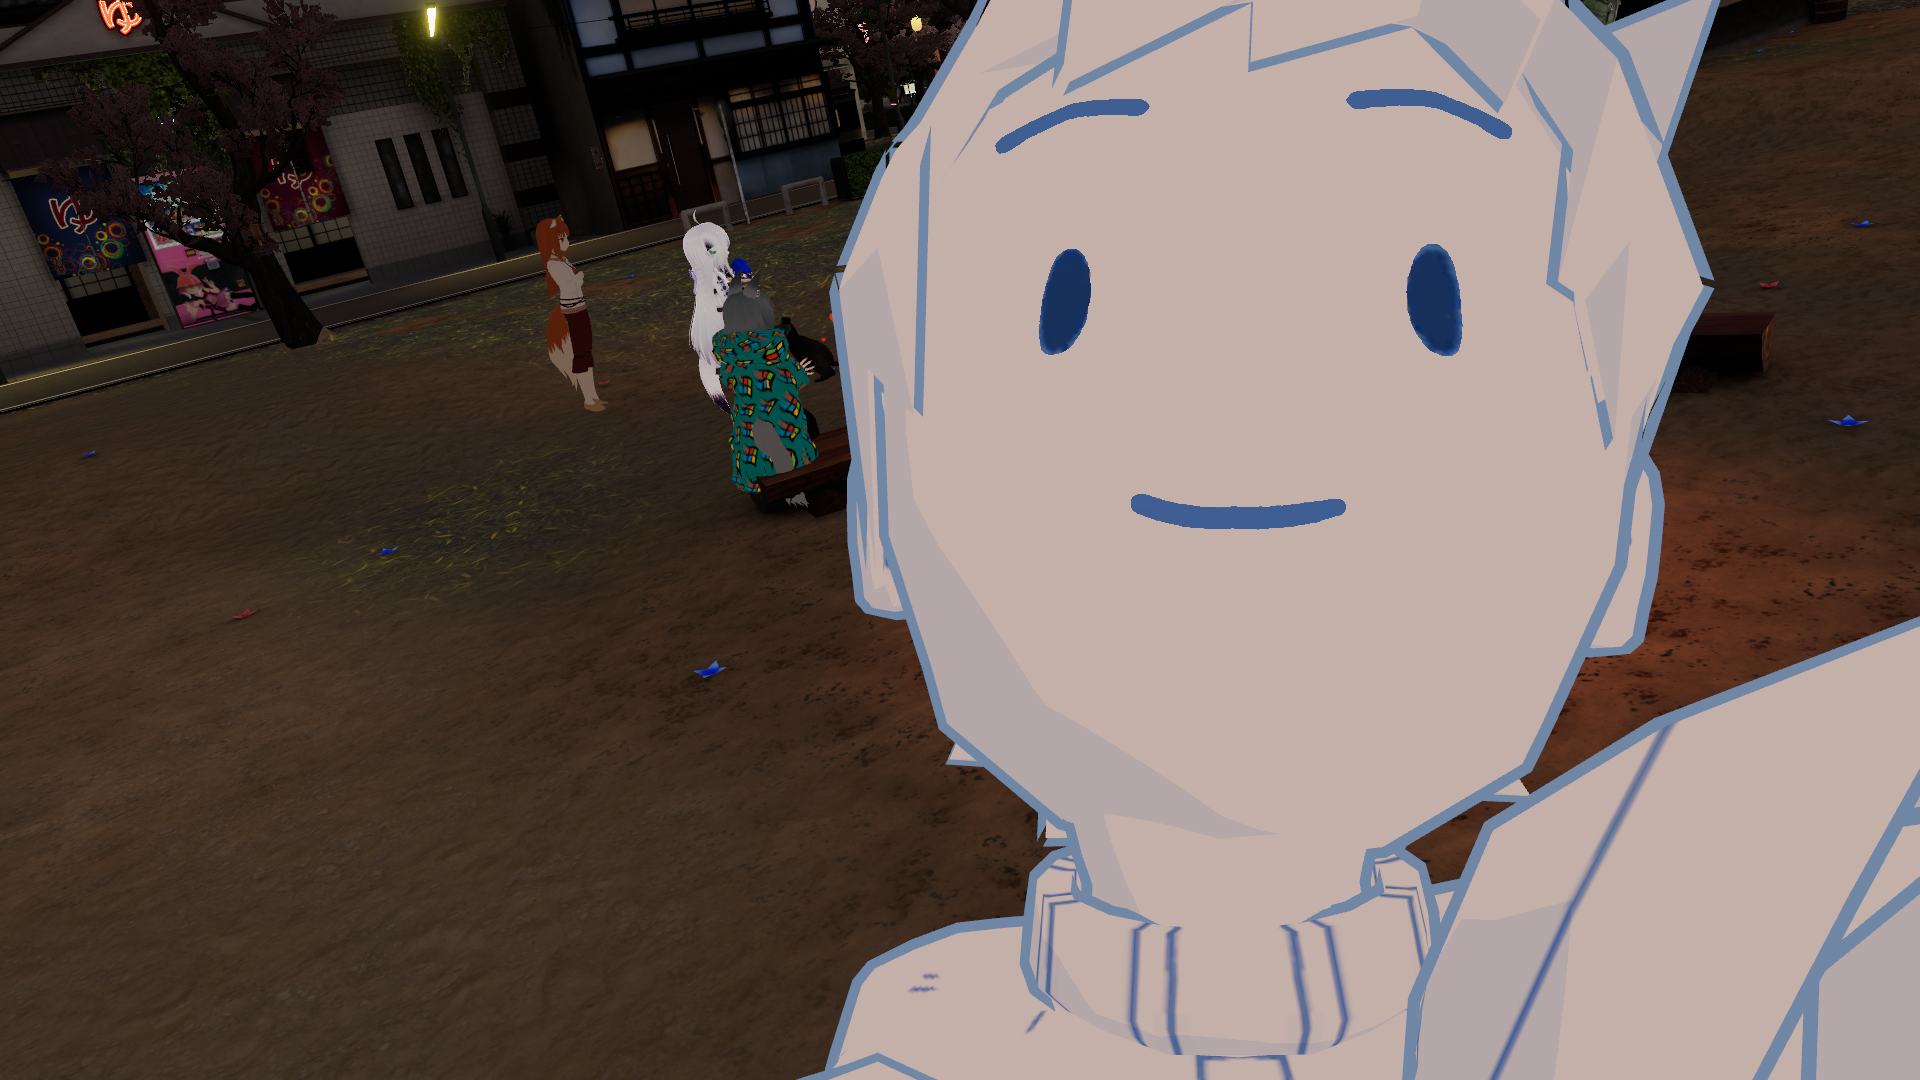 VRChat_1920x1080_2022-06-03_04-36-13.667.png